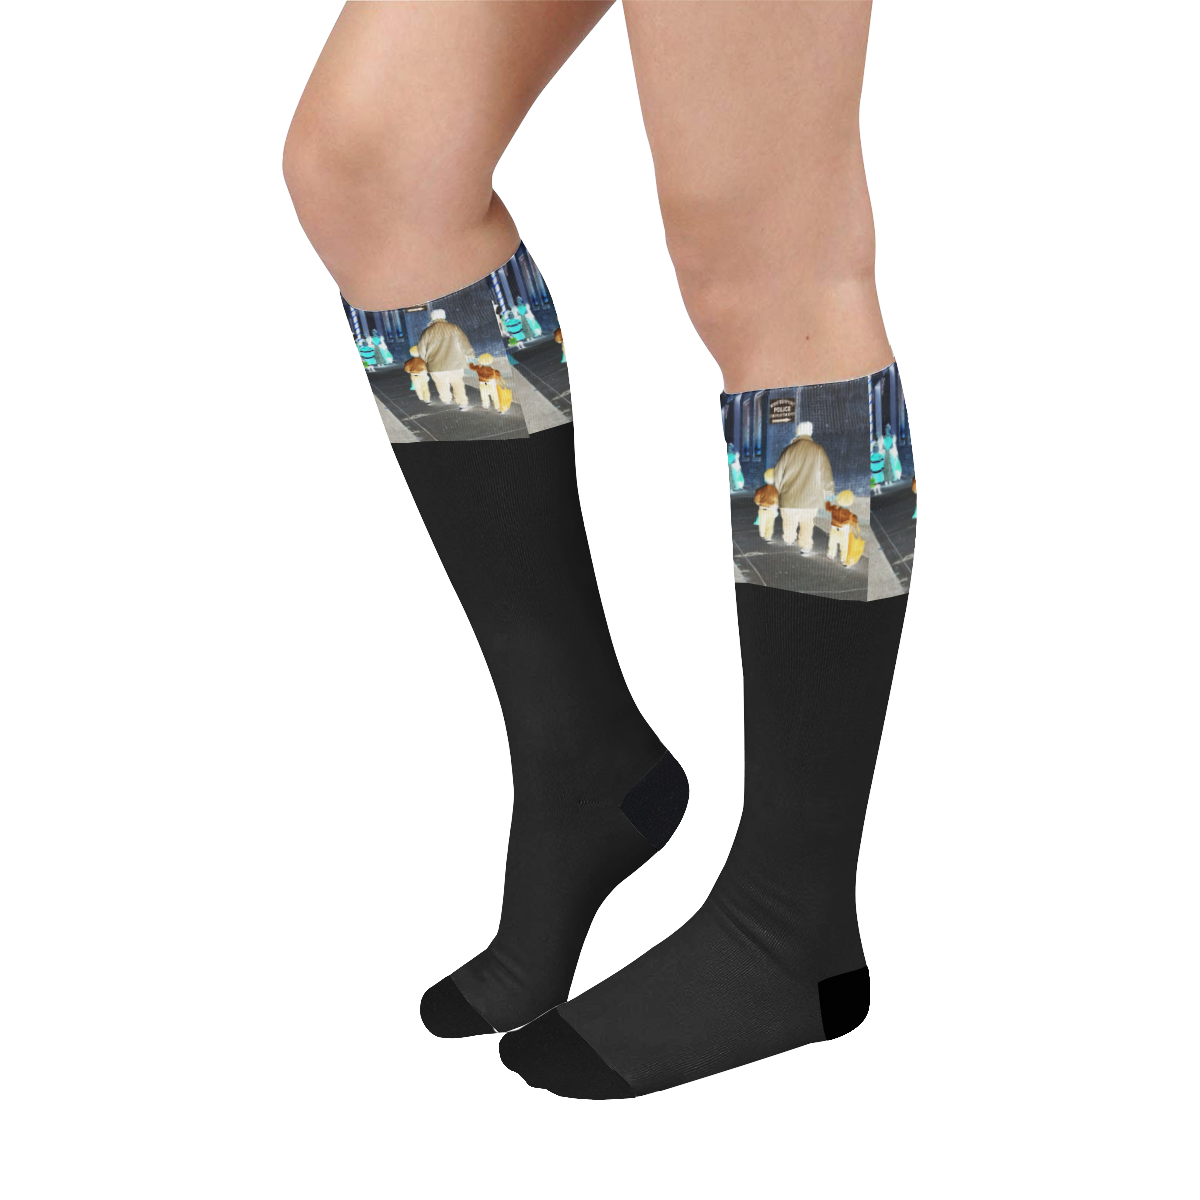 Ghosts roaming the street Over-The-Calf Socks